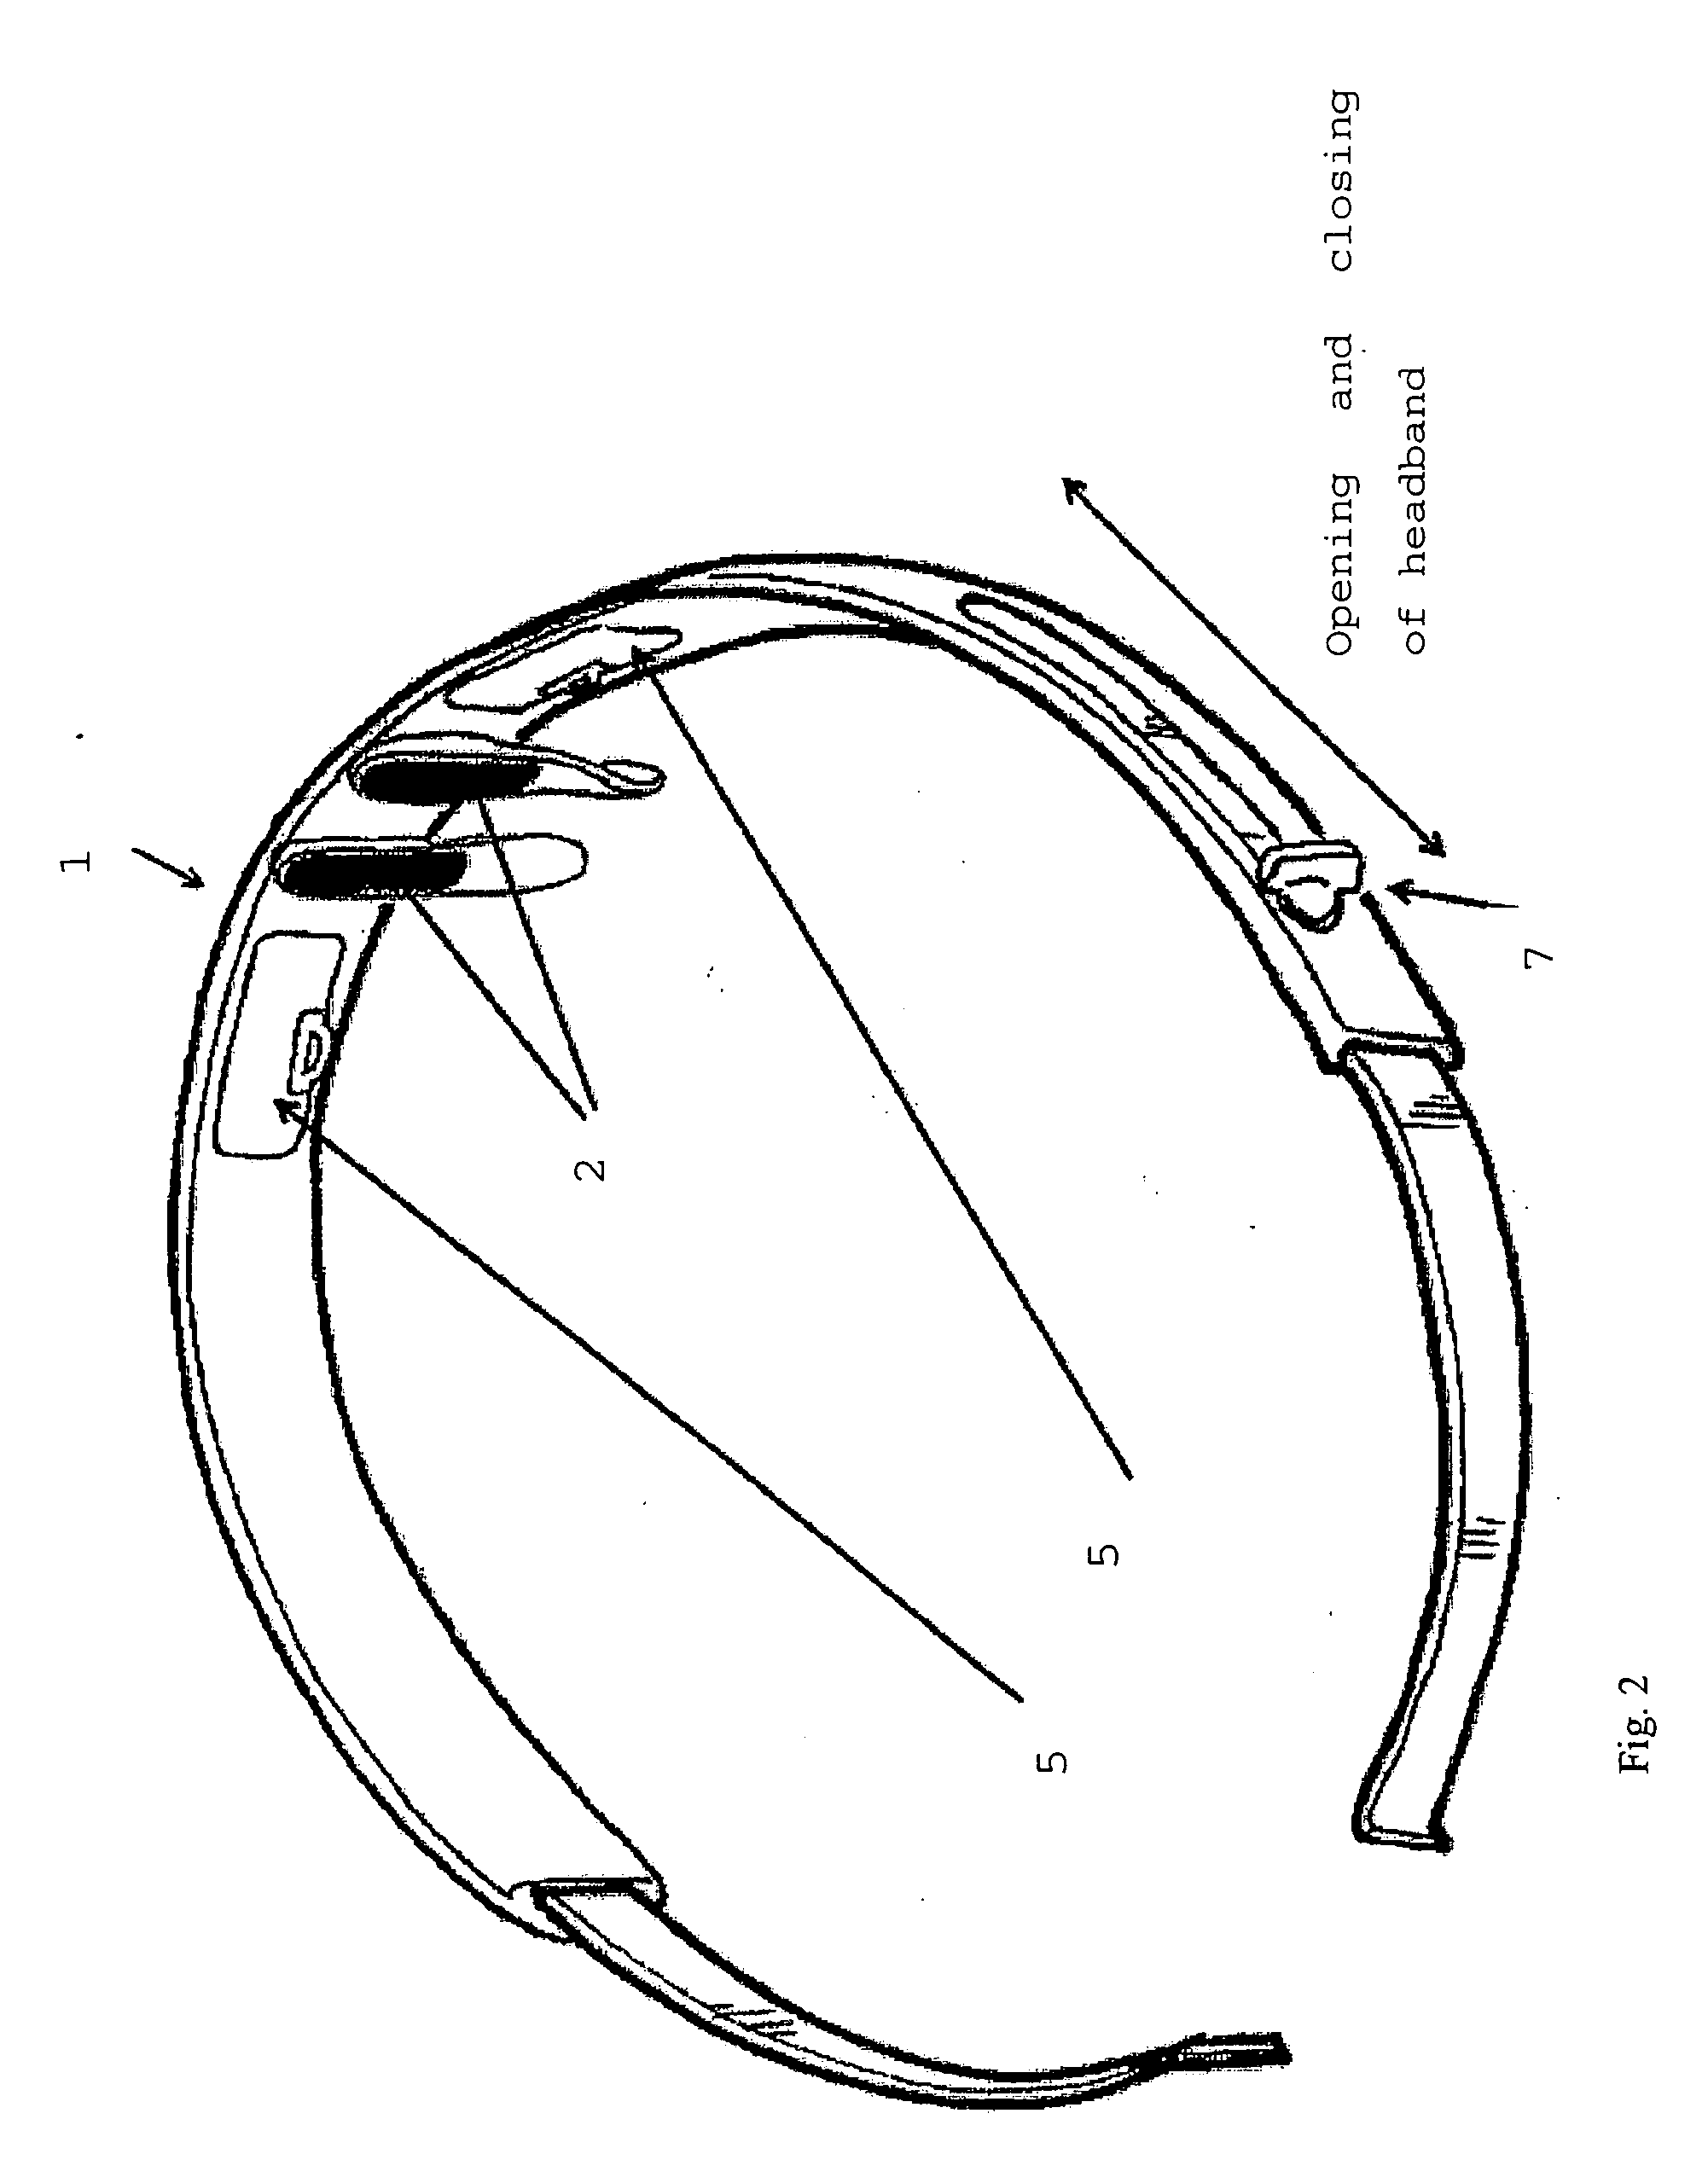 Apparatus For Electro-Inhibition Of Facial Muscles